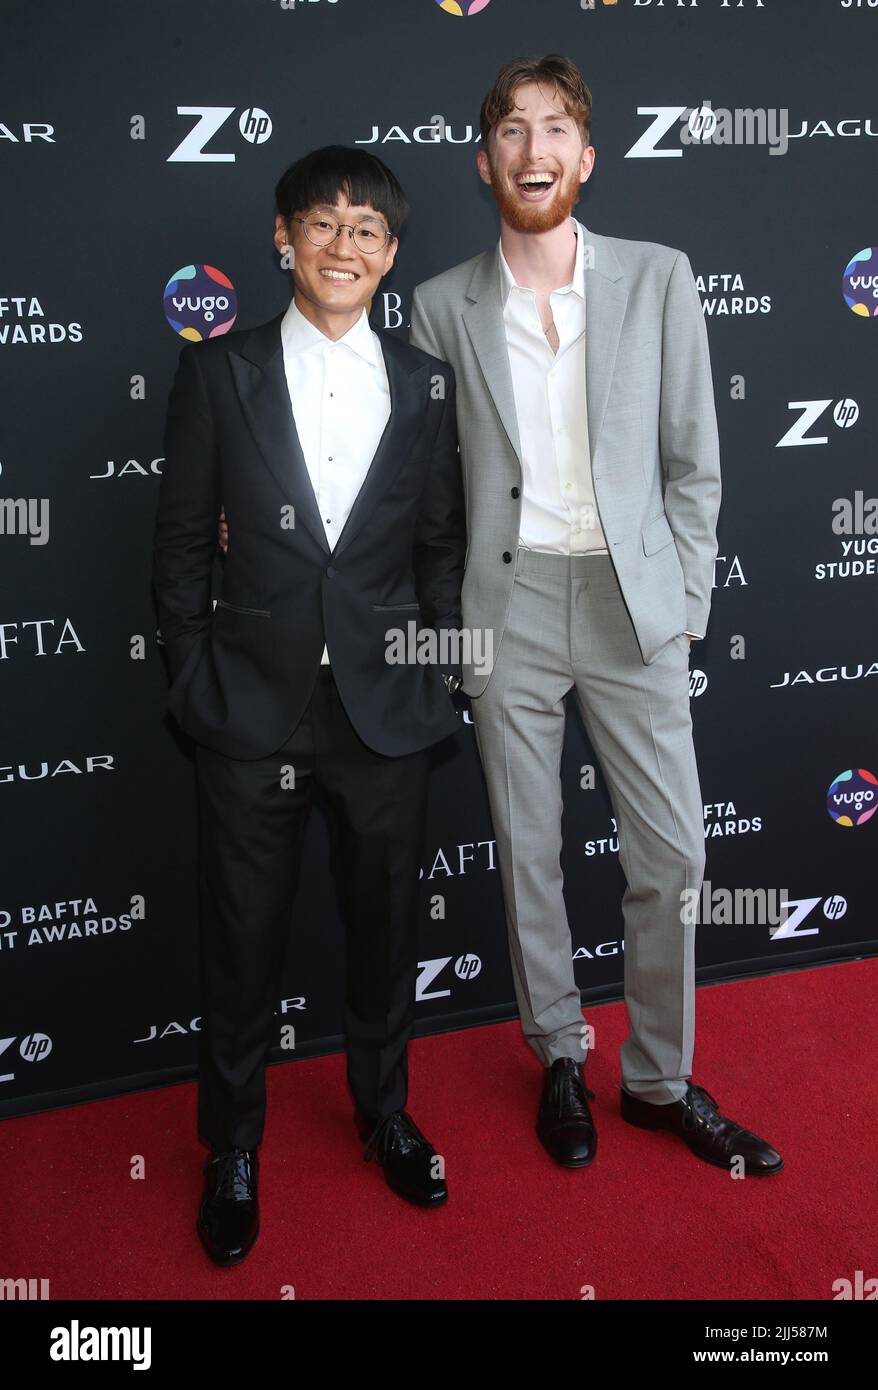 Los Angeles, USA. 22nd July, 2022. Caleb Freundlich, Shuhao Tse, at the 2022 BAFTA Student Awards Finale at Harmony Gold in Los Angeles, USAlifornia on July 22, 2022. Credit: Faye Sadou/Media Punch/Alamy Live News Stock Photo